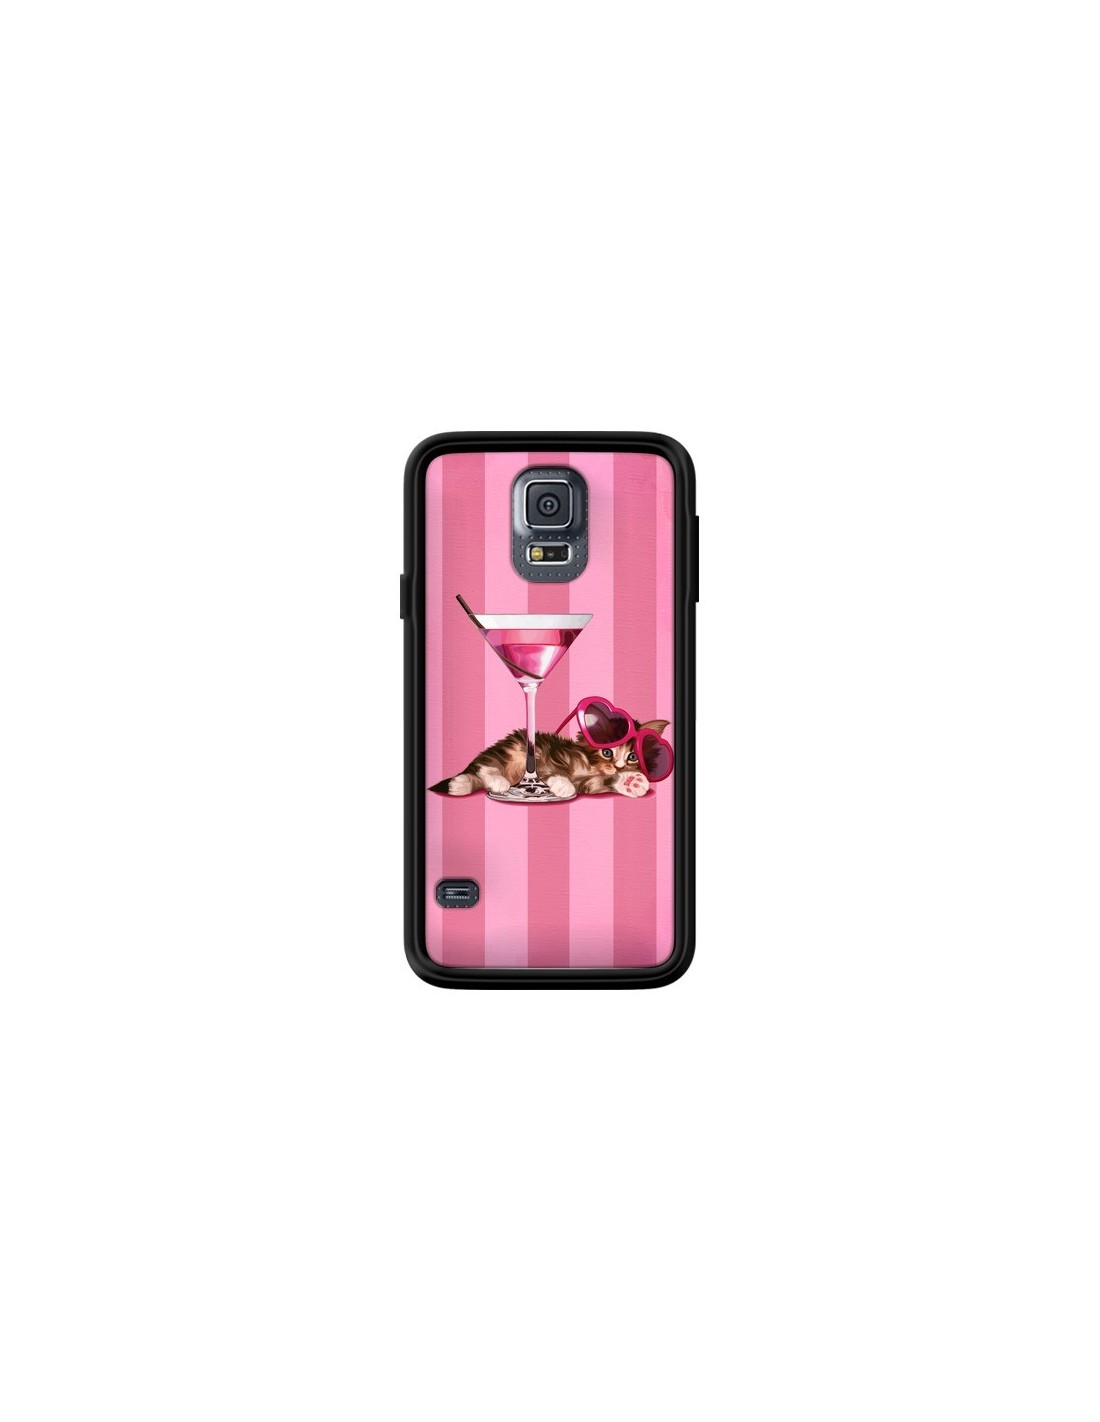 Coque Chaton Chat Kitten Cocktail Lunettes Coeur Pour Samsung Galaxy S5 Maryline Cazenave